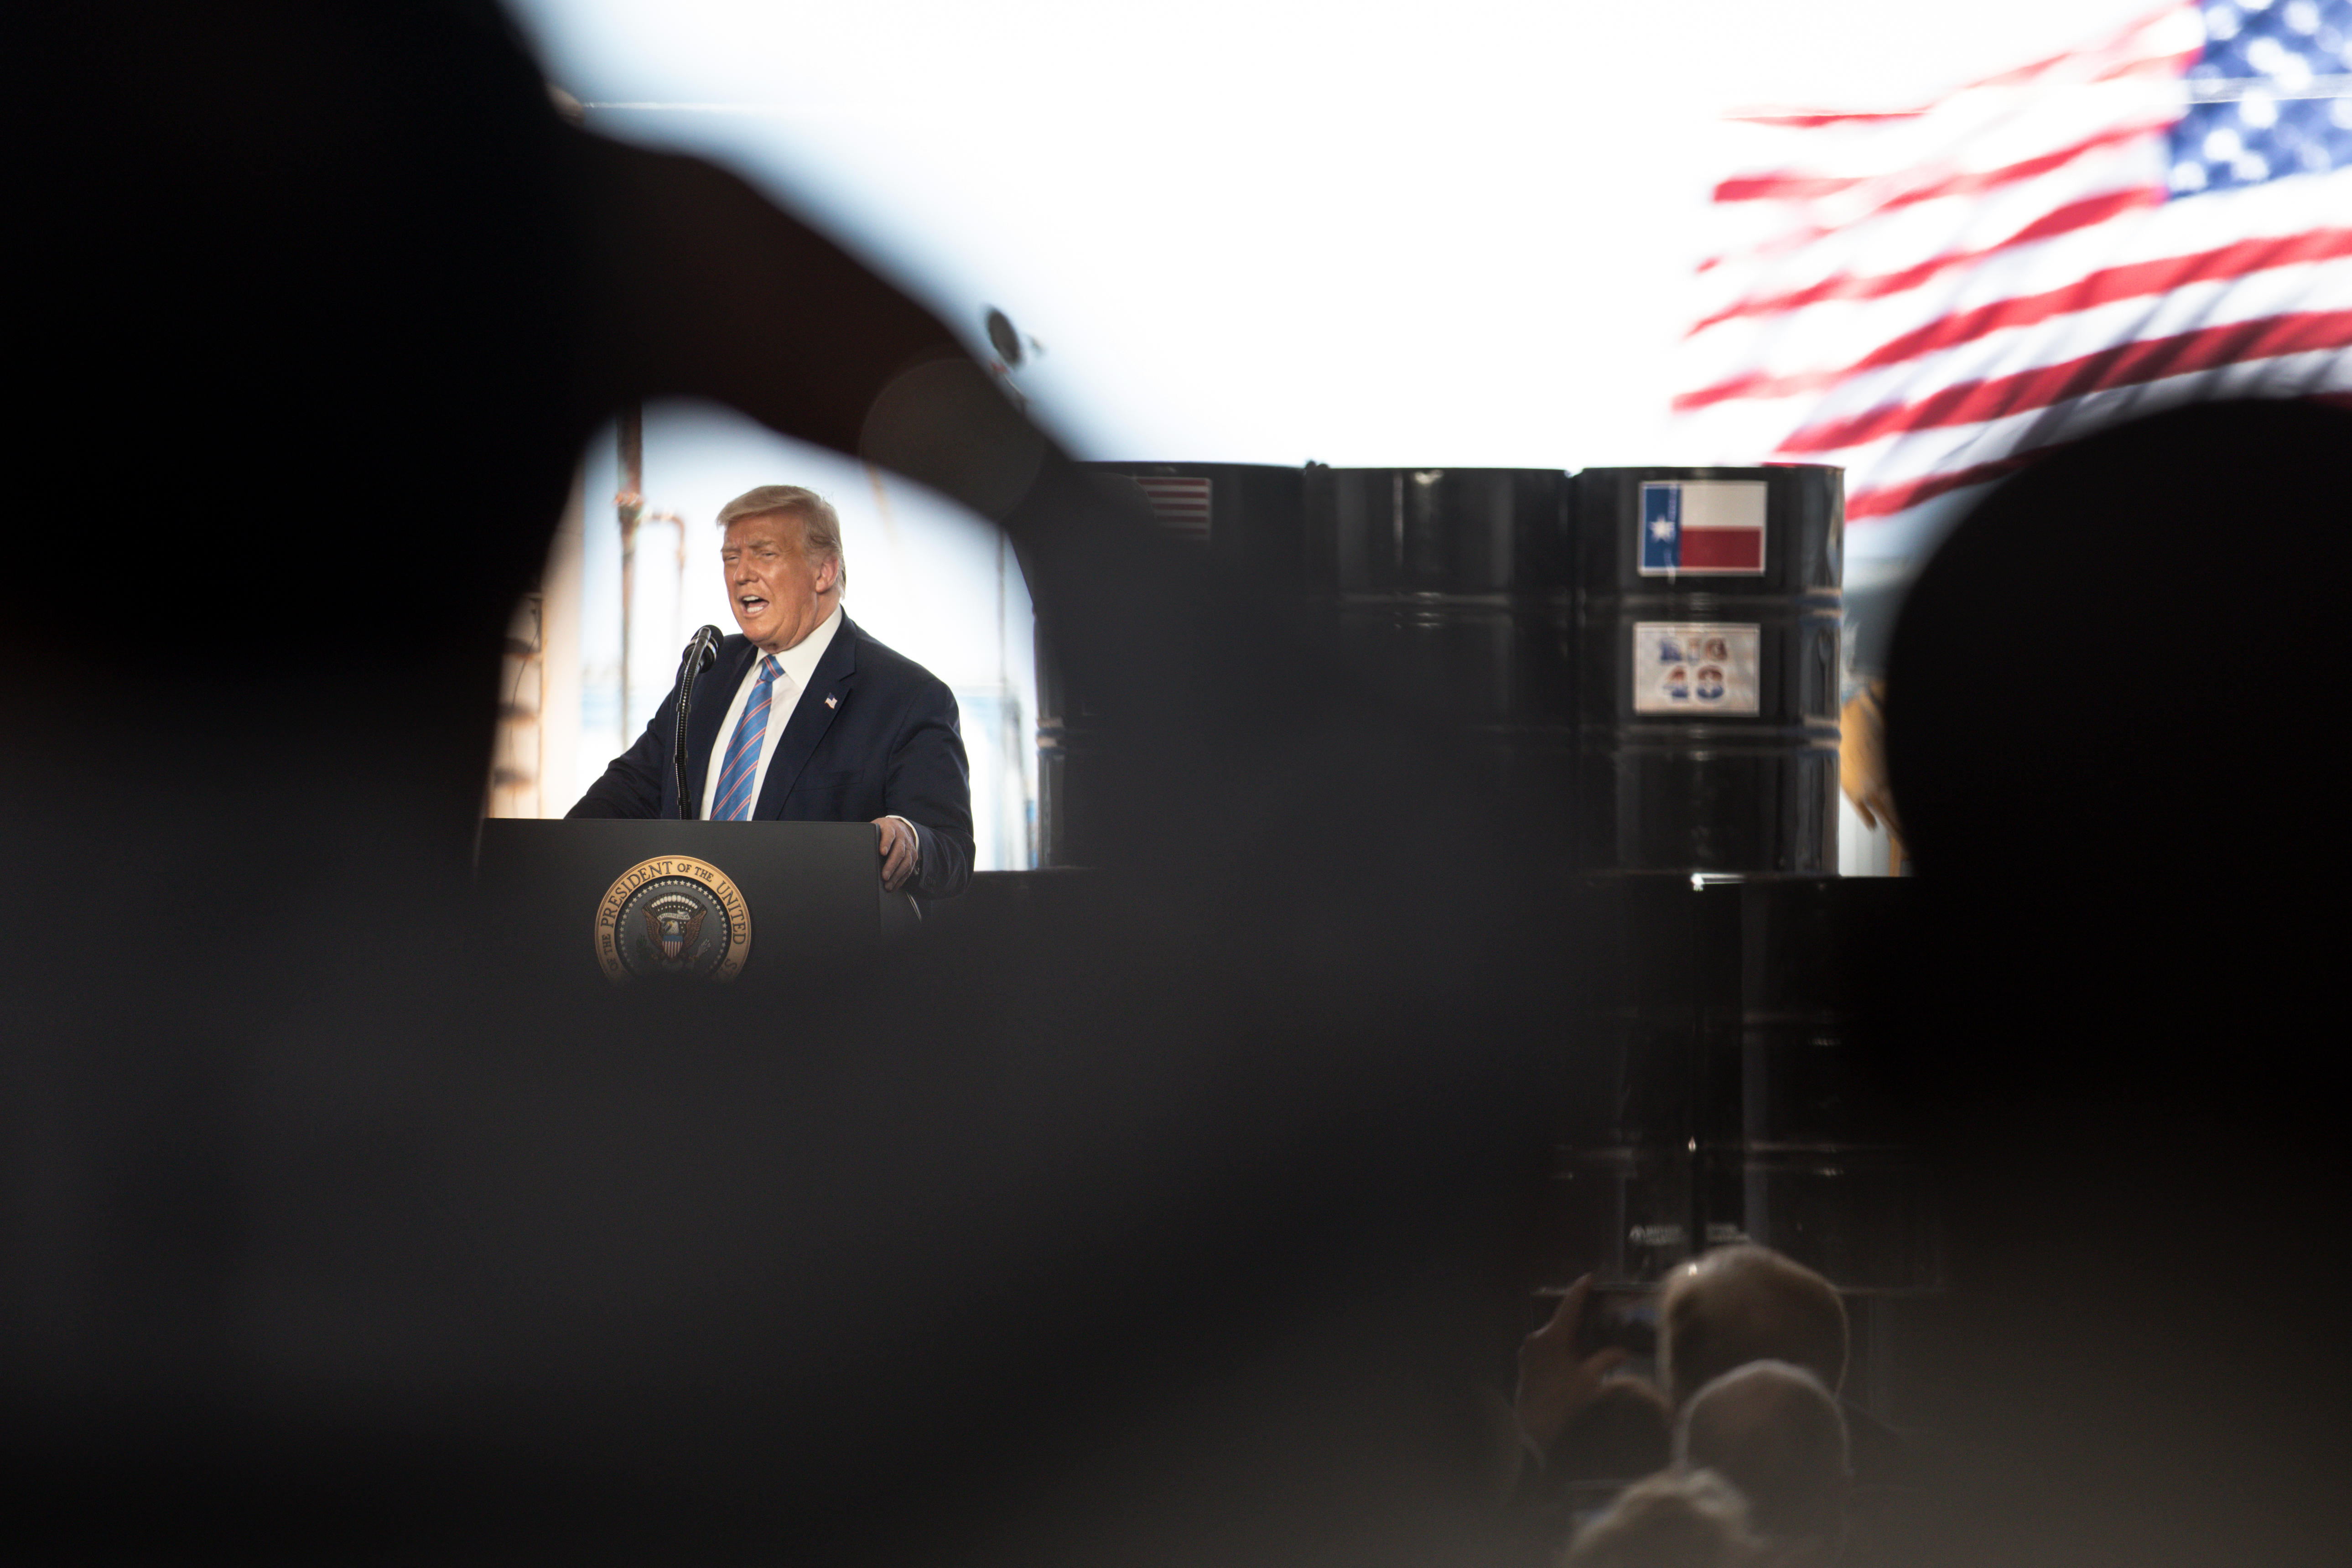 MIDLAND, TX - JULY 29: President Donald Trump speaks to city officials and employees of Double Eagle Energy on the site of an active oil rig on July 29, 2020 in Midland, Texas. Trump began his visit to the Permian Basin at a fundraising event in Odessa and concluded in Midland for a tour the oil rig and to discuss energy policy. (Photo by Montinique Monroe/Getty Images)